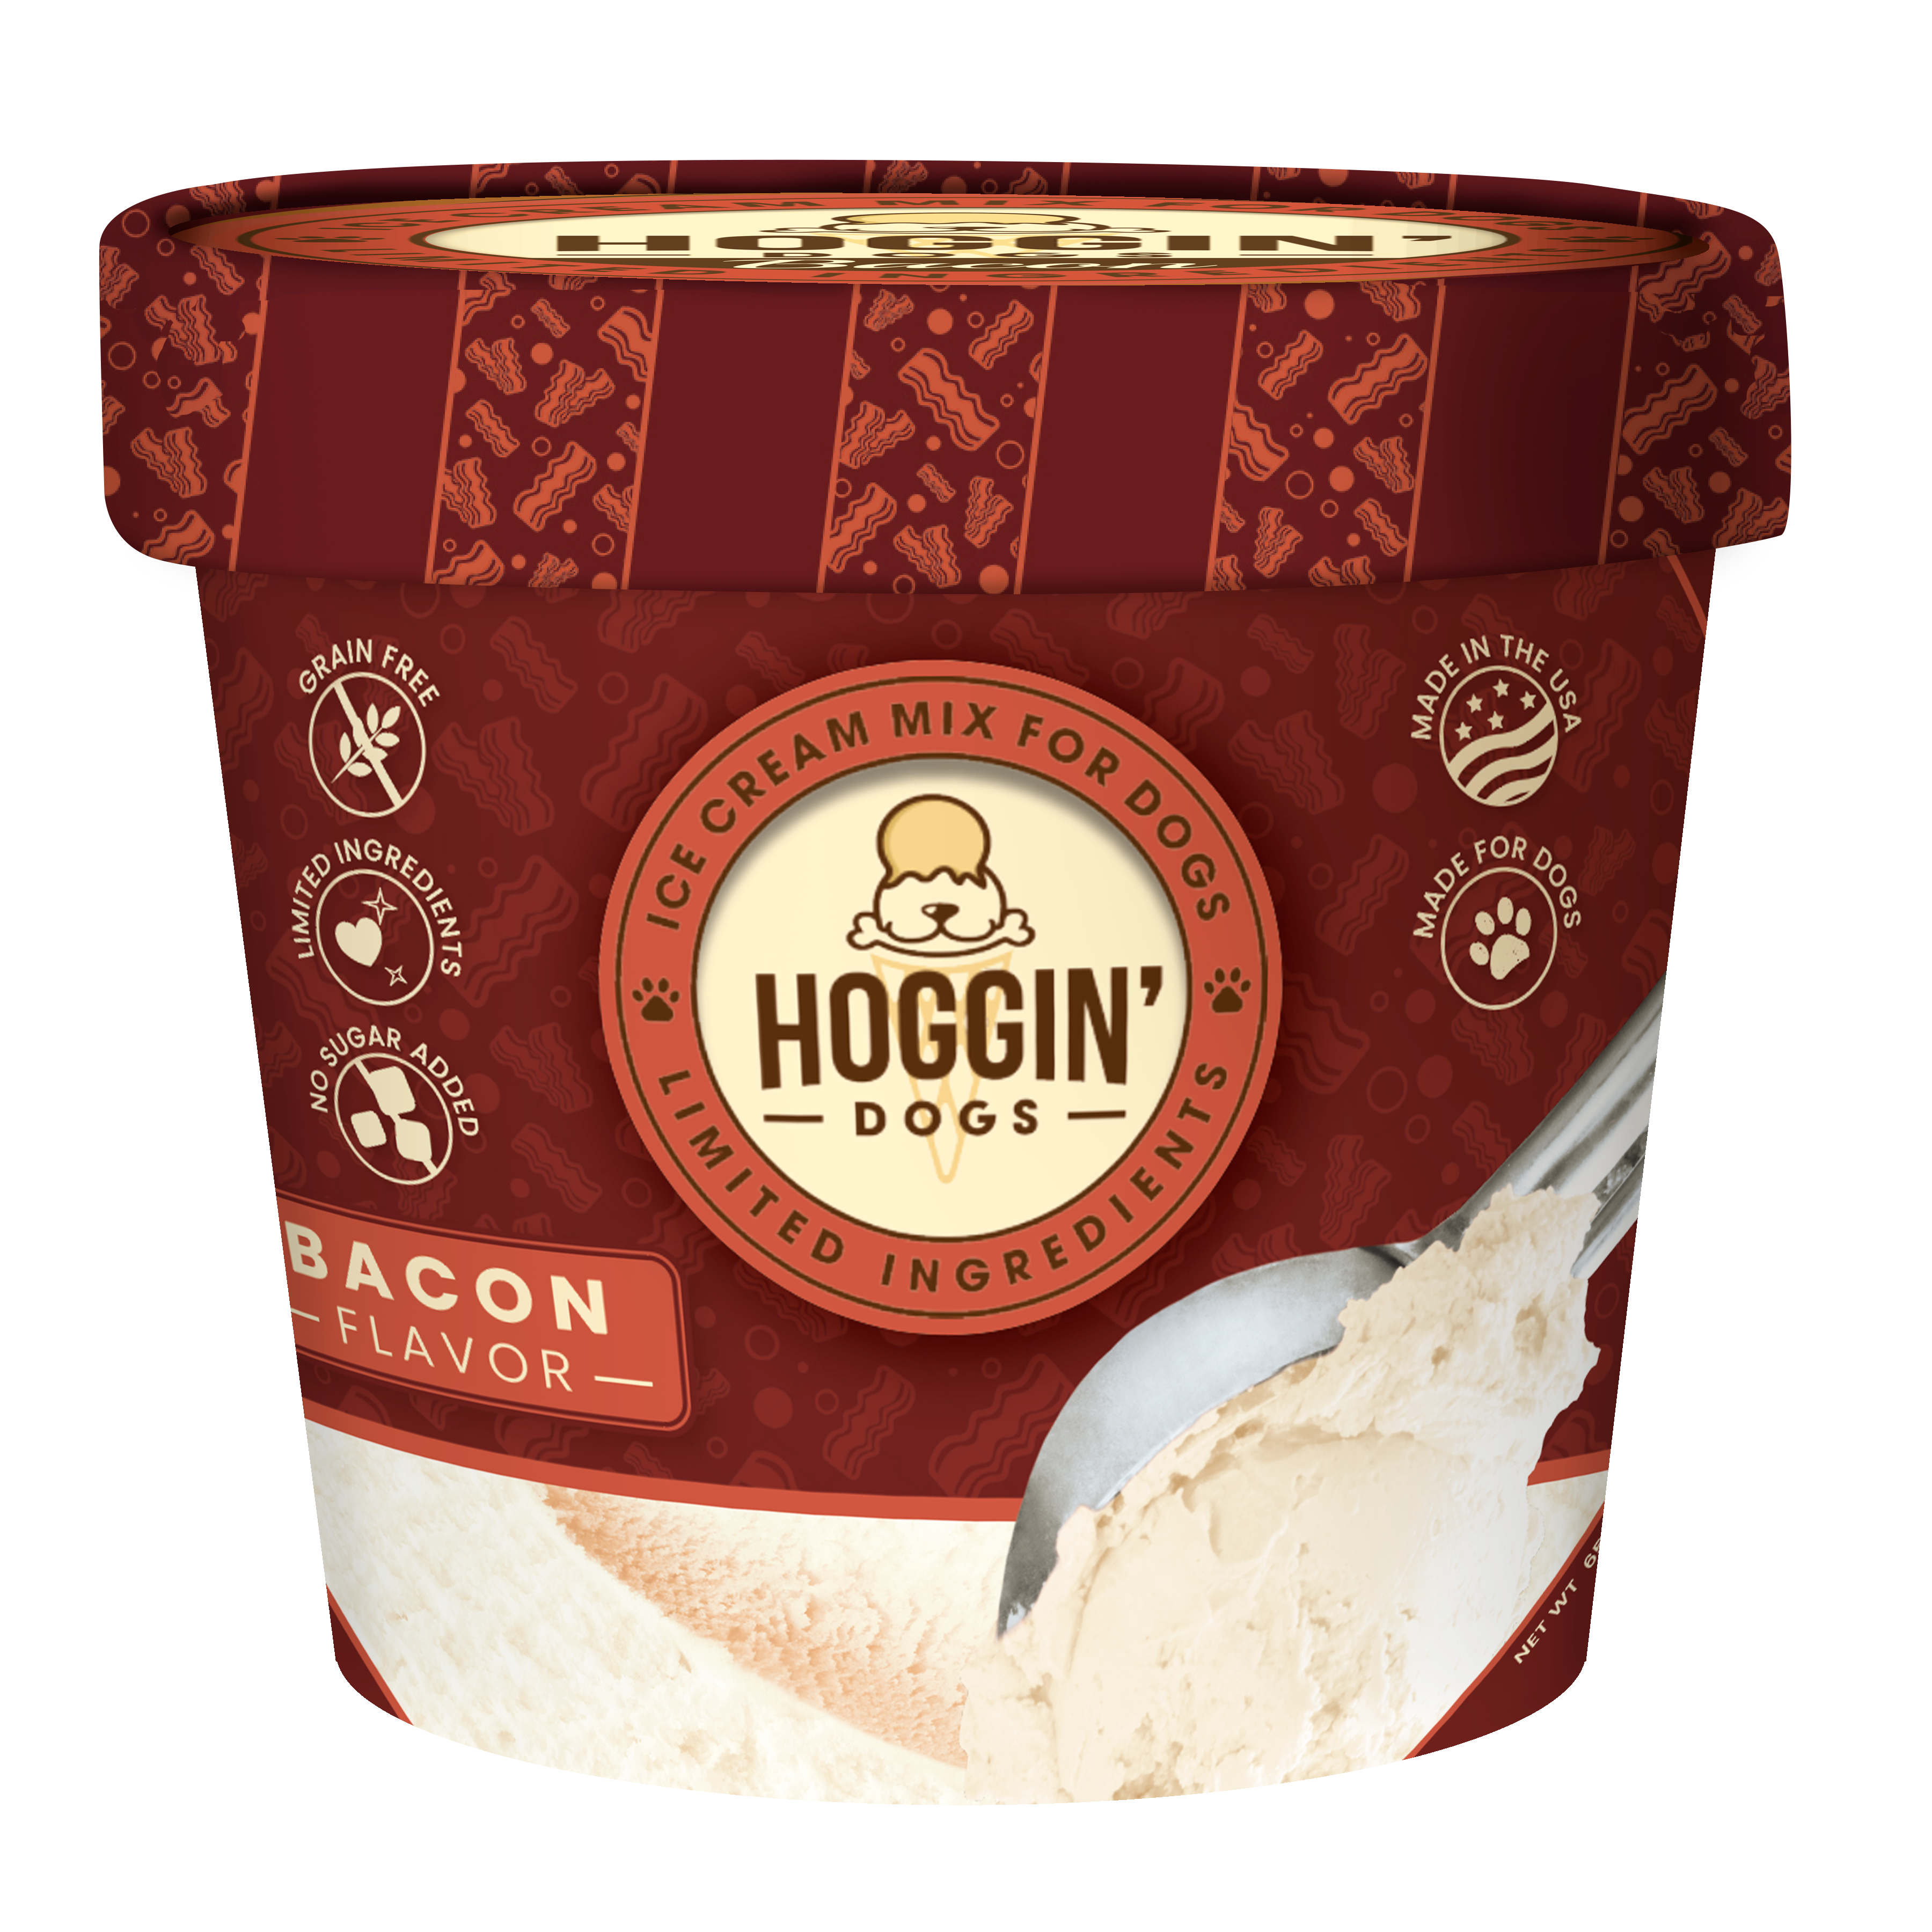 http://puppycake.com/Shared/Images/Product/Hoggin-Dogs-Ice-Cream-Mix-Bacon-Cup-Size-2-32-oz/oVt4v6VI.png